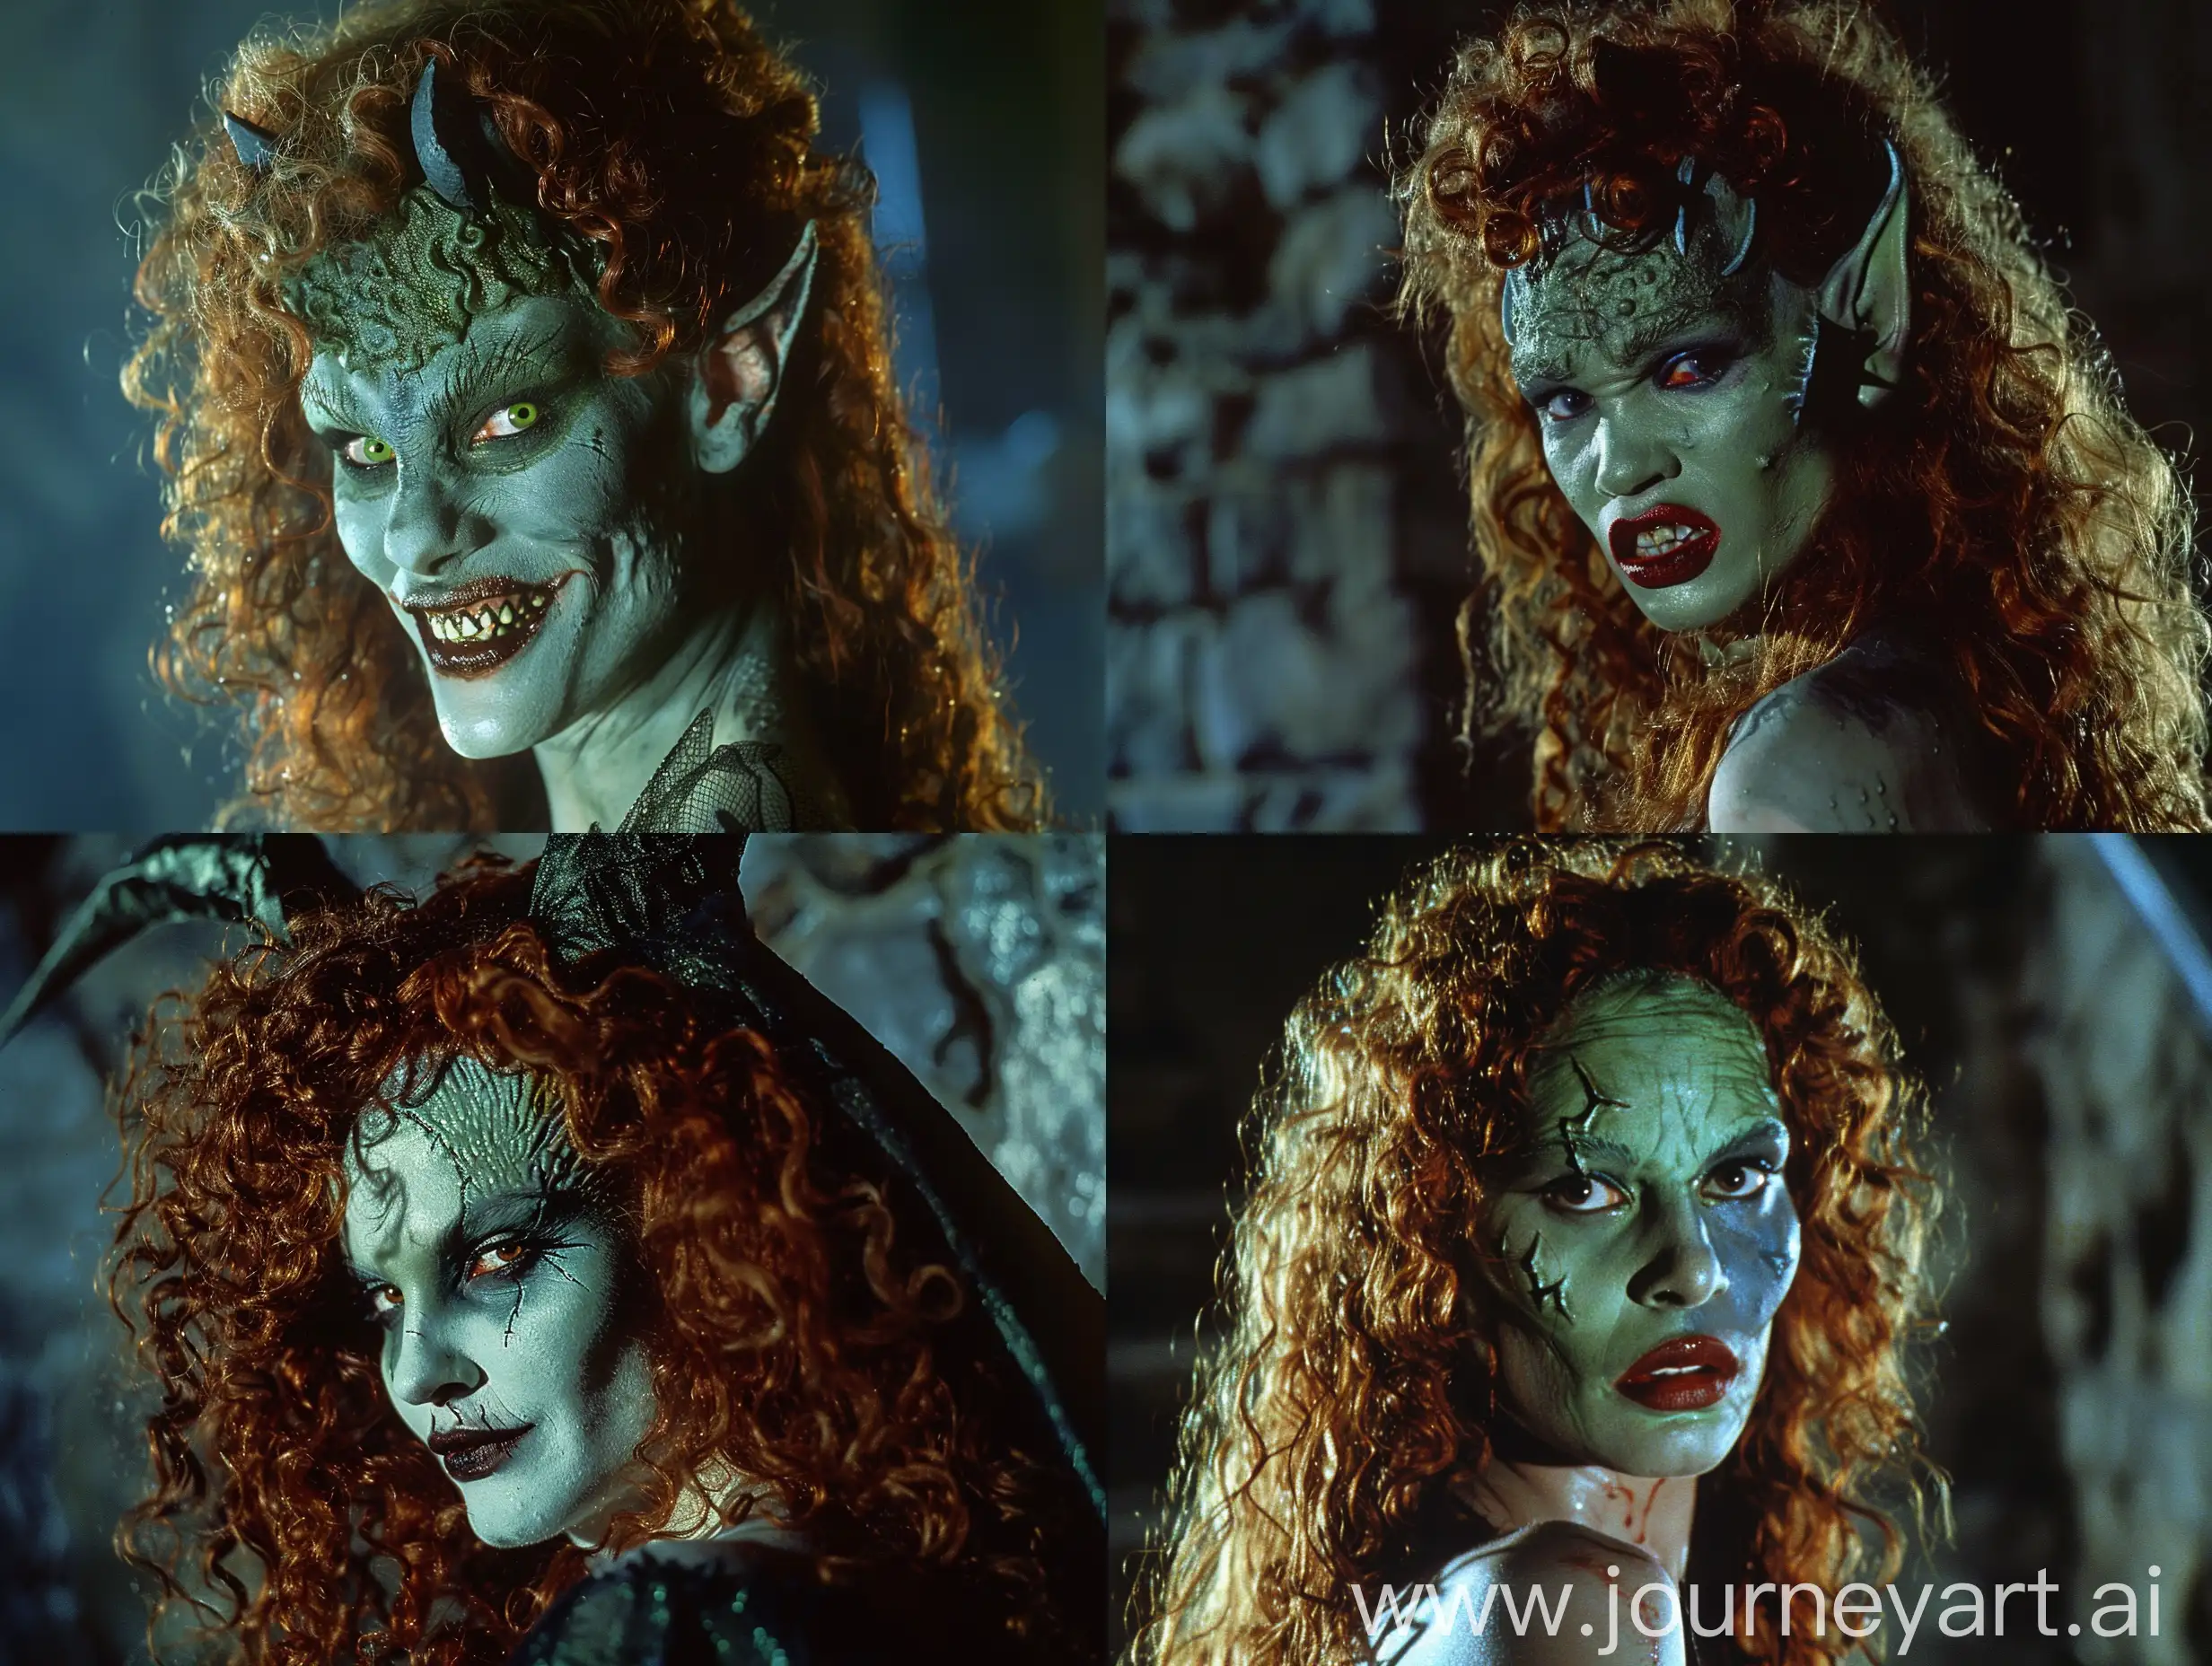 fit female demon with dark greyish-green skin, curly redhead, attractive green face with pointy chin, enlarged sharp eyebrow ridges and cheekbones, vampire fangs, special makeup effects by Tom Savini, half body shot, film scene from a 1980s horror movie like Evil Dead by Sam Raimi and Demoni by Lamberto Bava, dehydrated